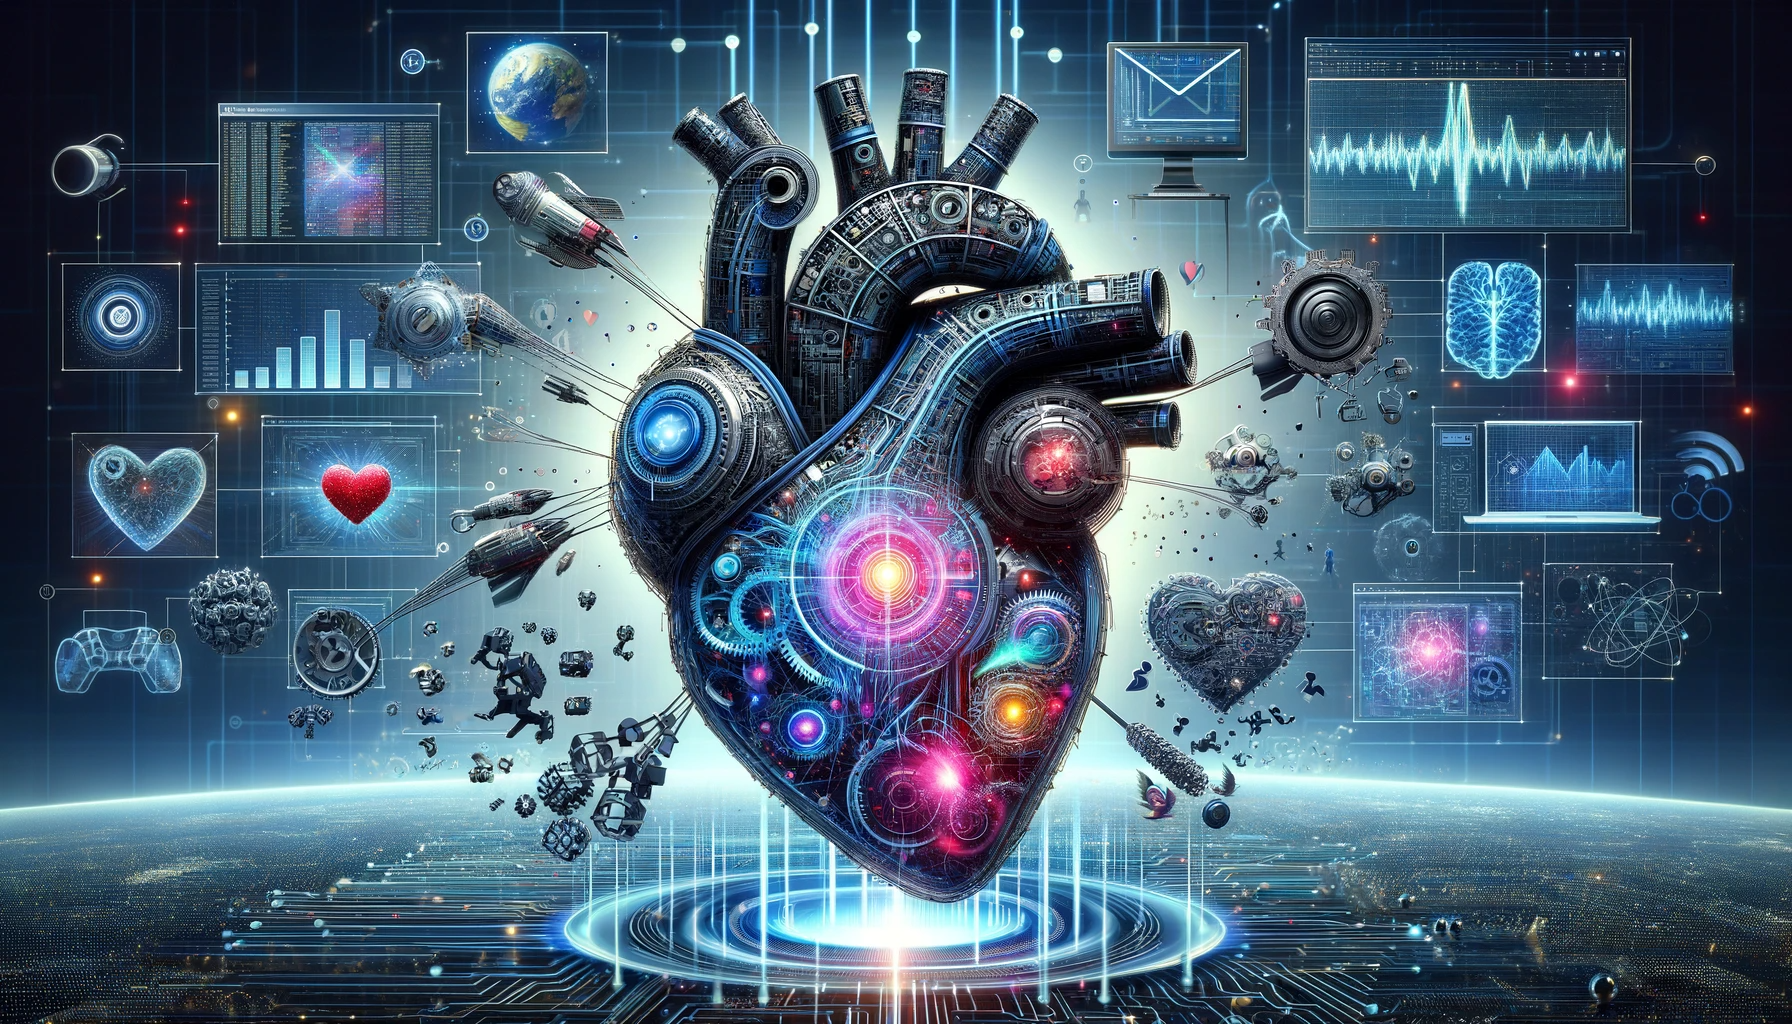 Digital heart symbolizing Machine Learning as AI's core, showcasing algorithms and learning applications